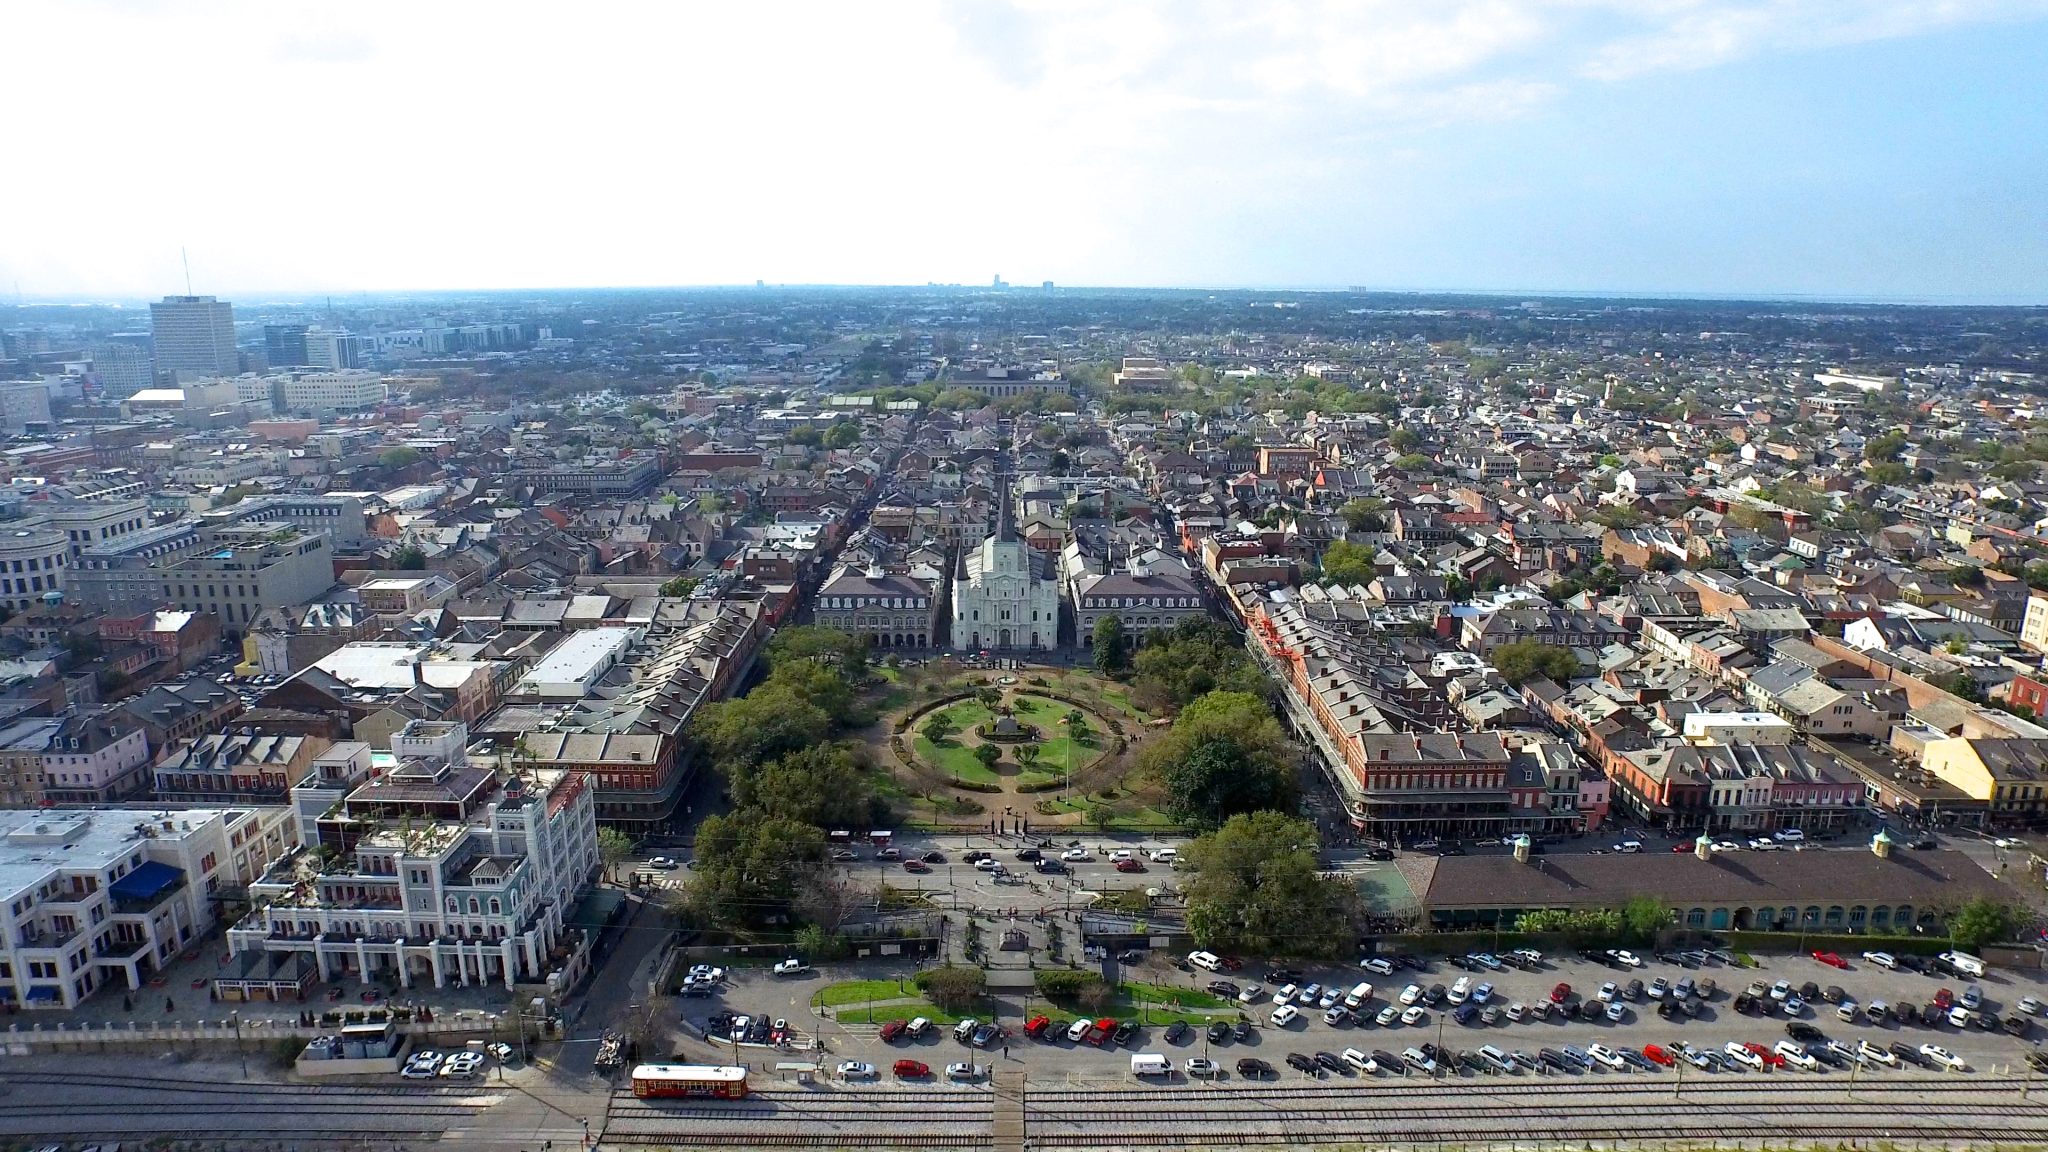 Jackson Square, New Orleans. Aerial drone footage.